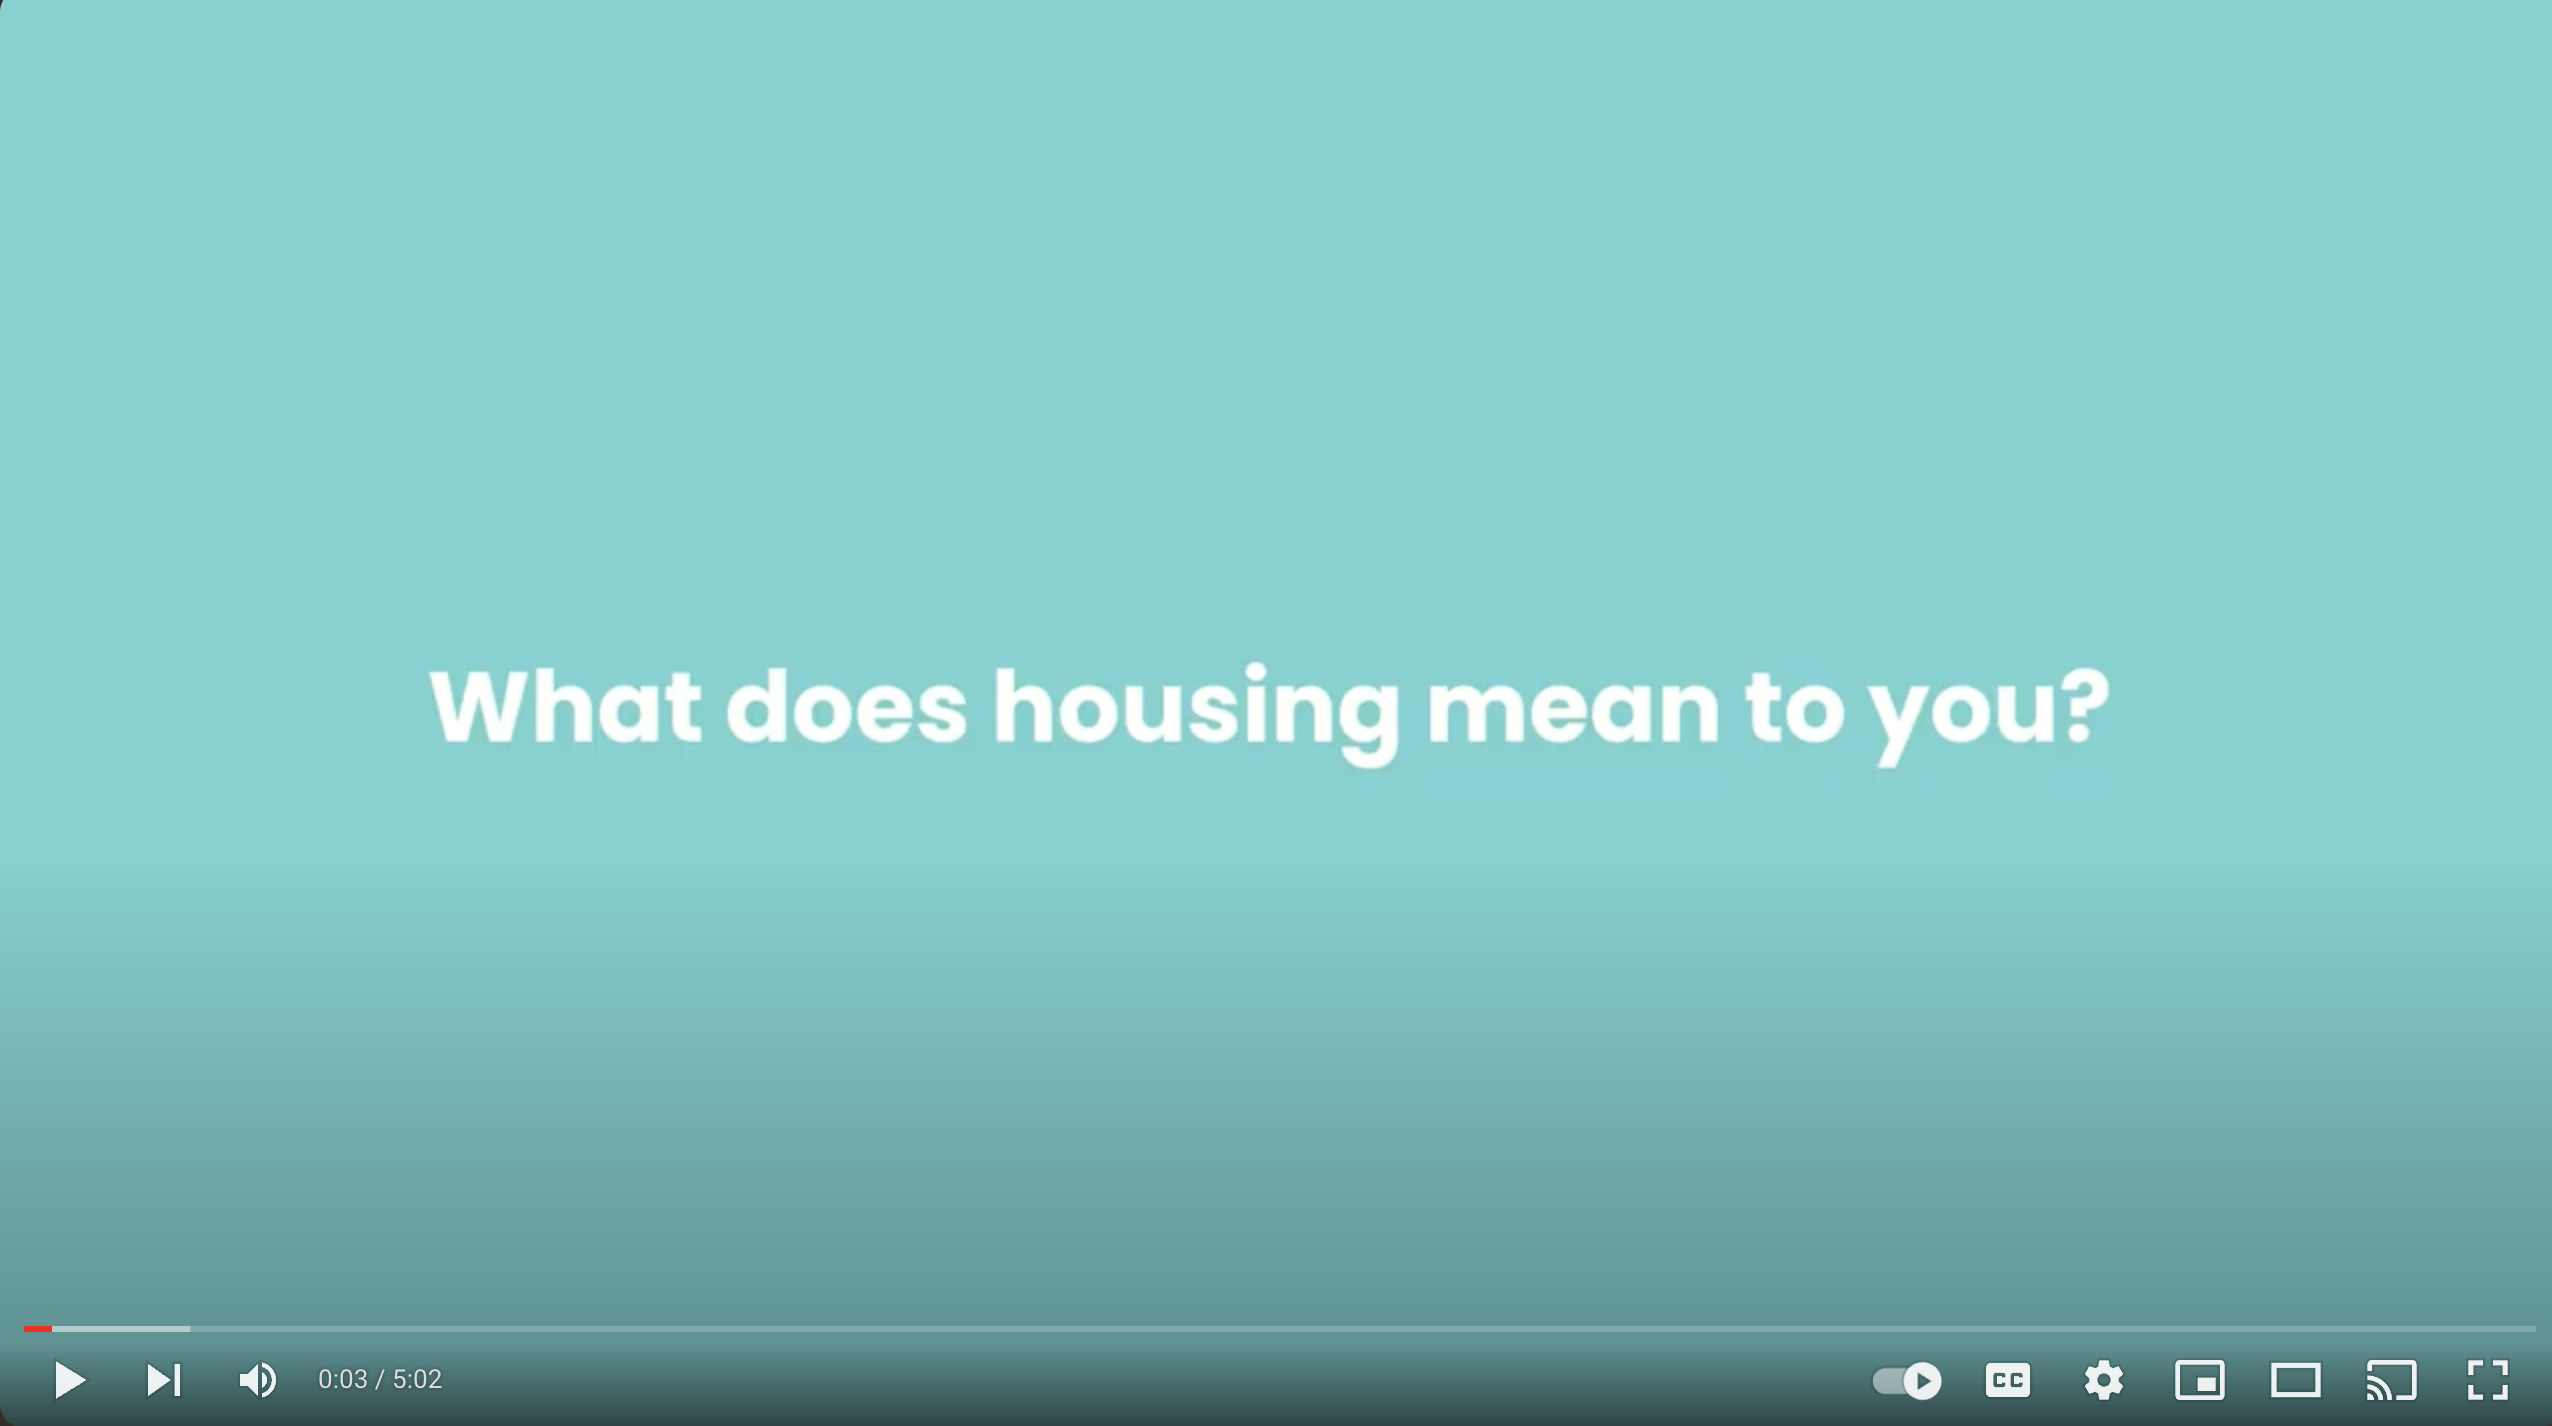 What Does Housing Mean to You?